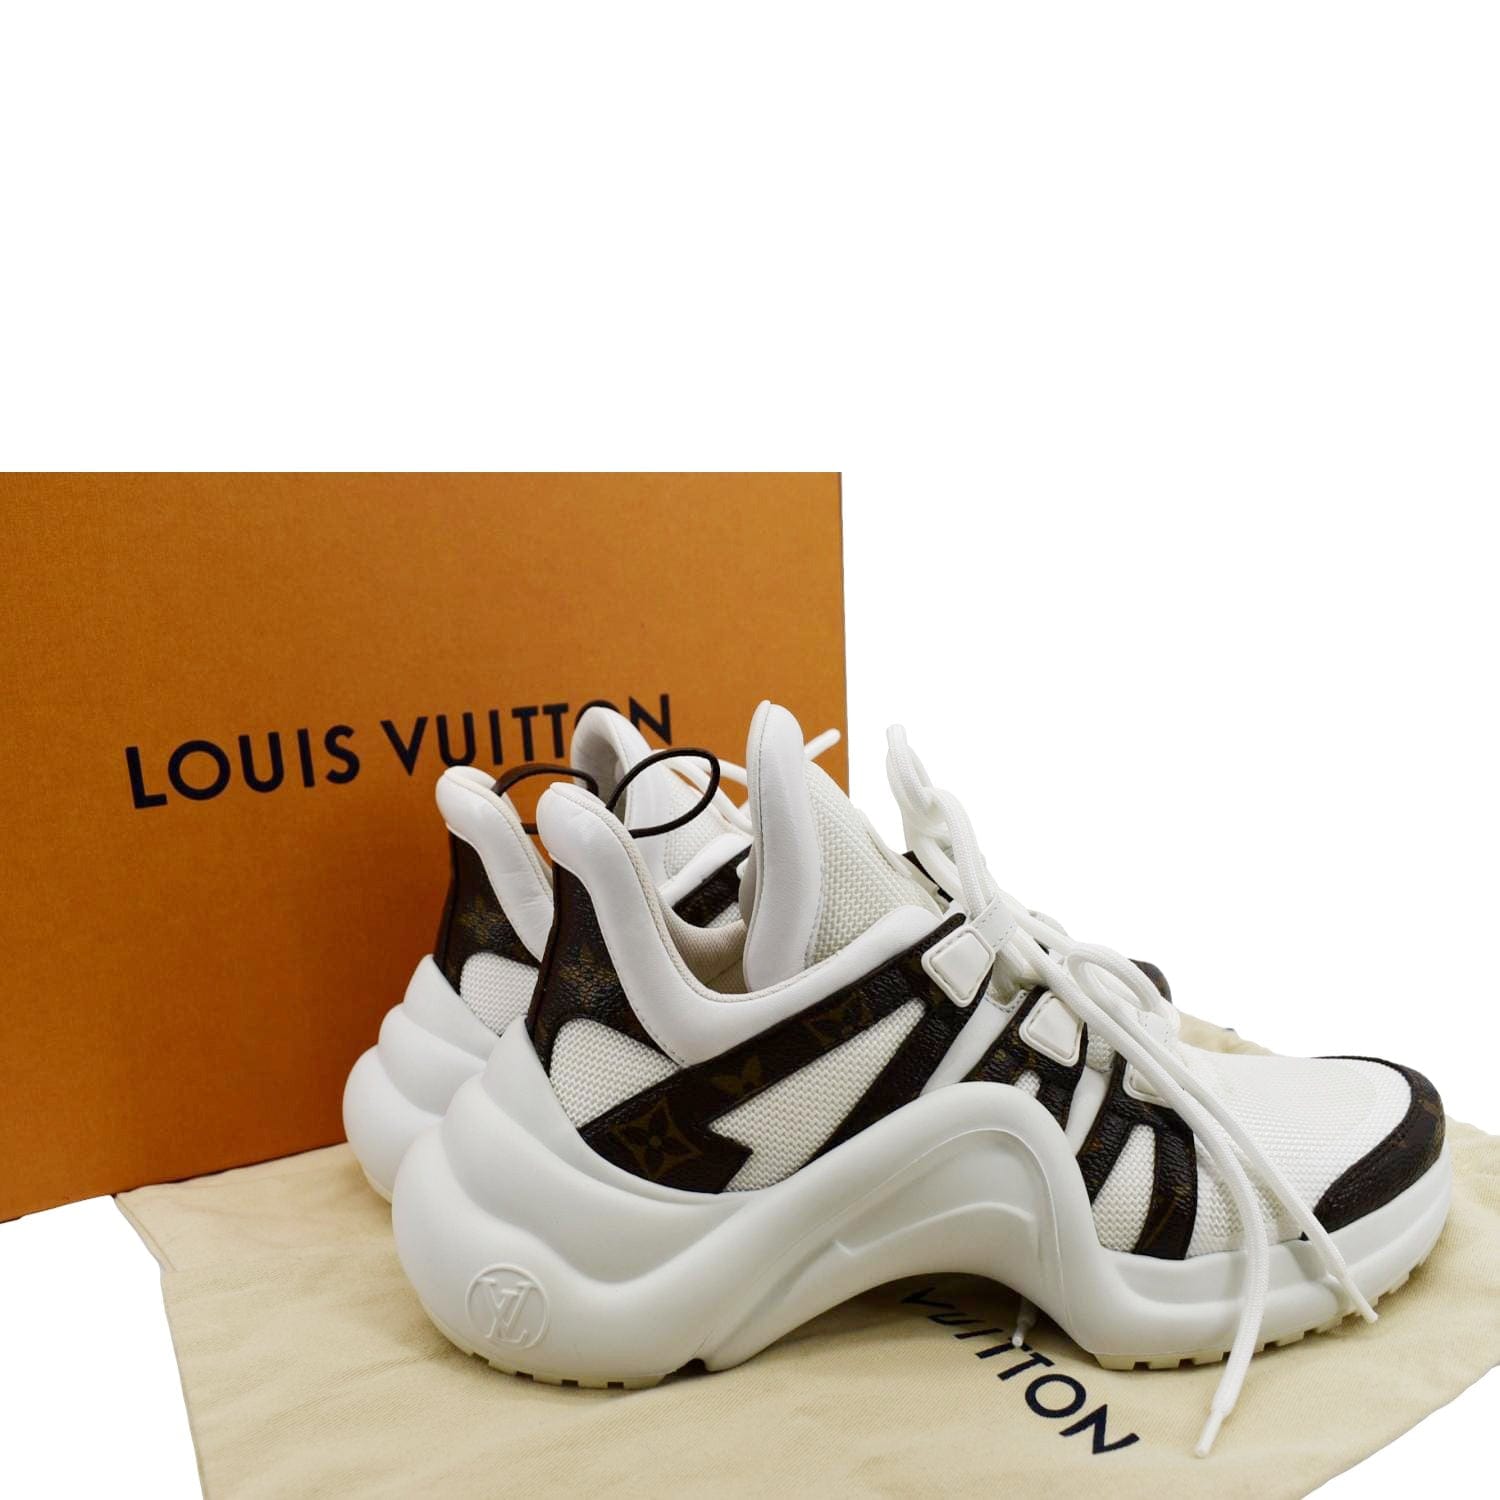 Louis Vuitton's Archlight Sneakers Are This Season's Must-Have